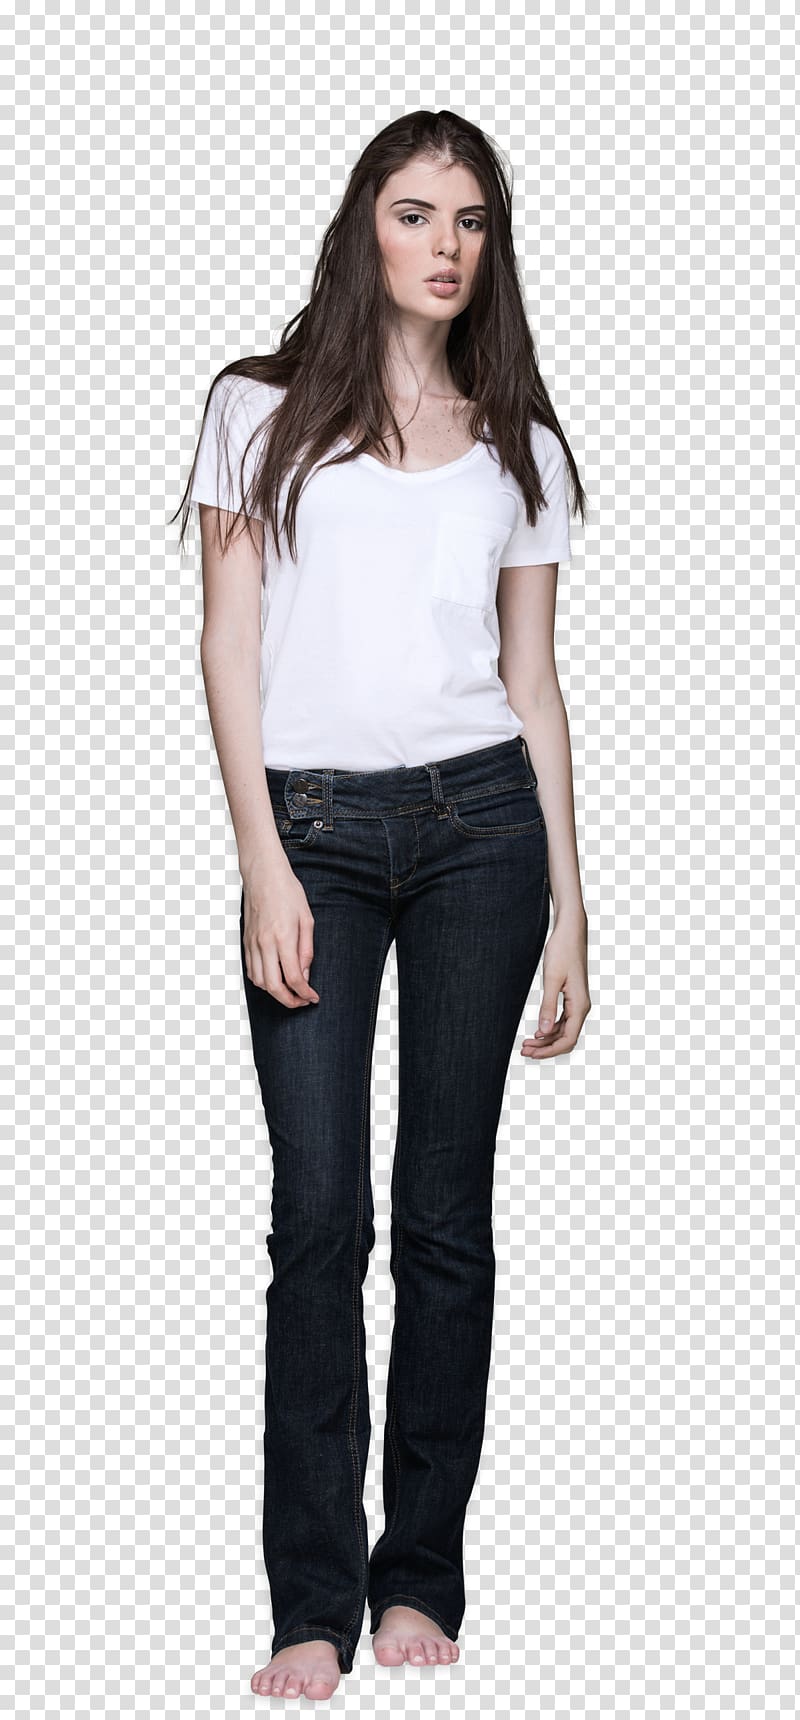 T-shirt White Sleeve Clothing Jeans, women dress transparent background PNG clipart